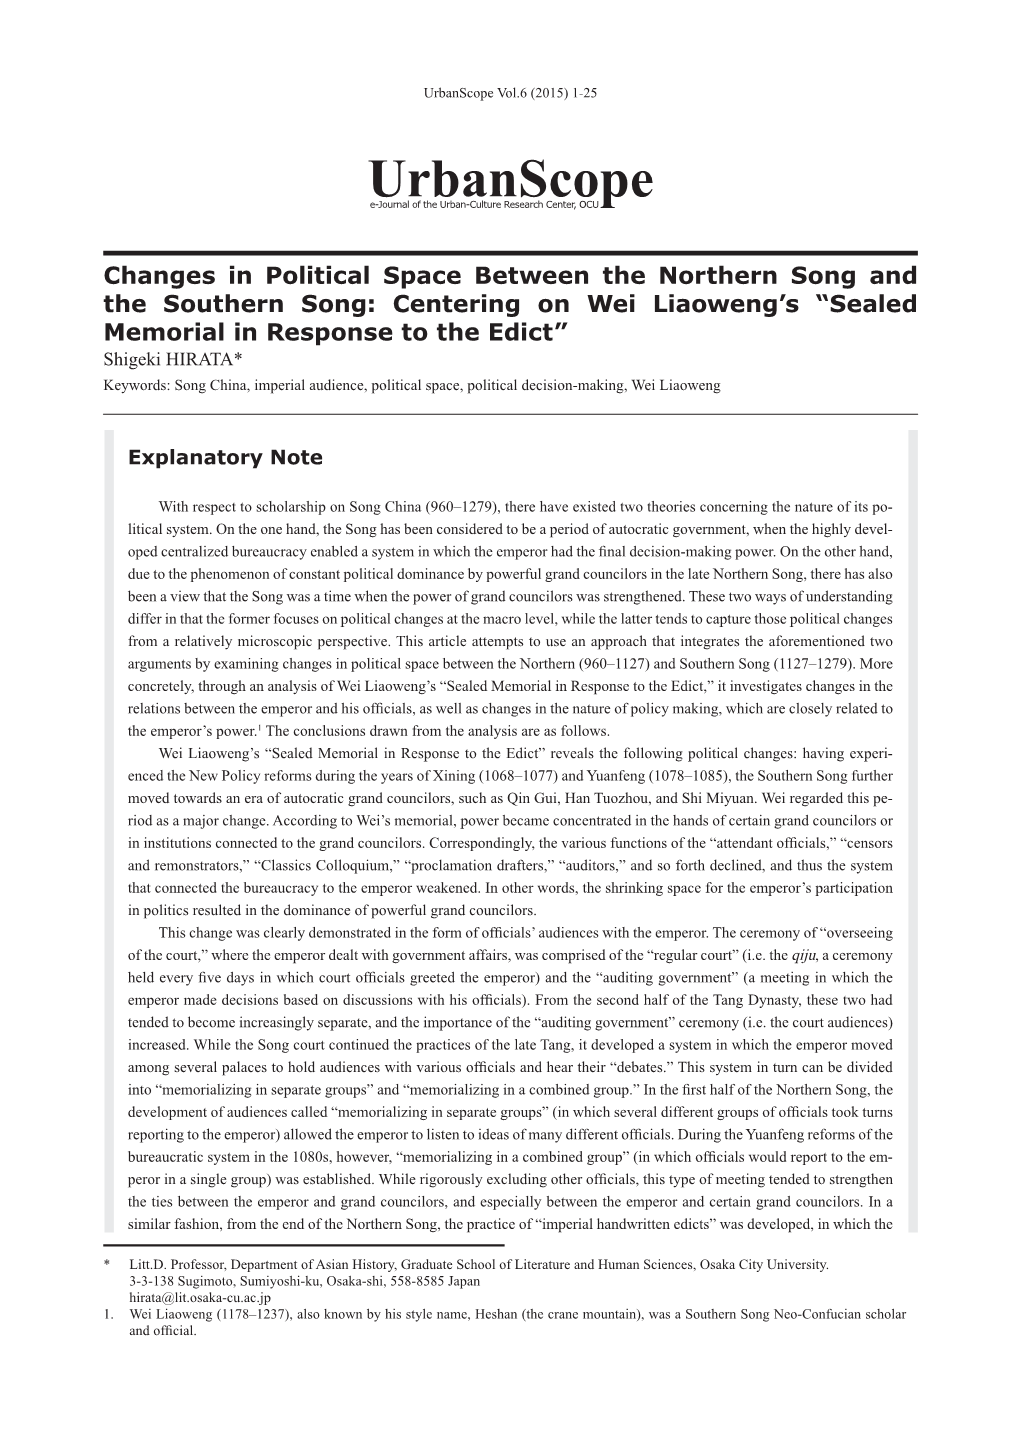 Changes in Political Space Between the Northern Song